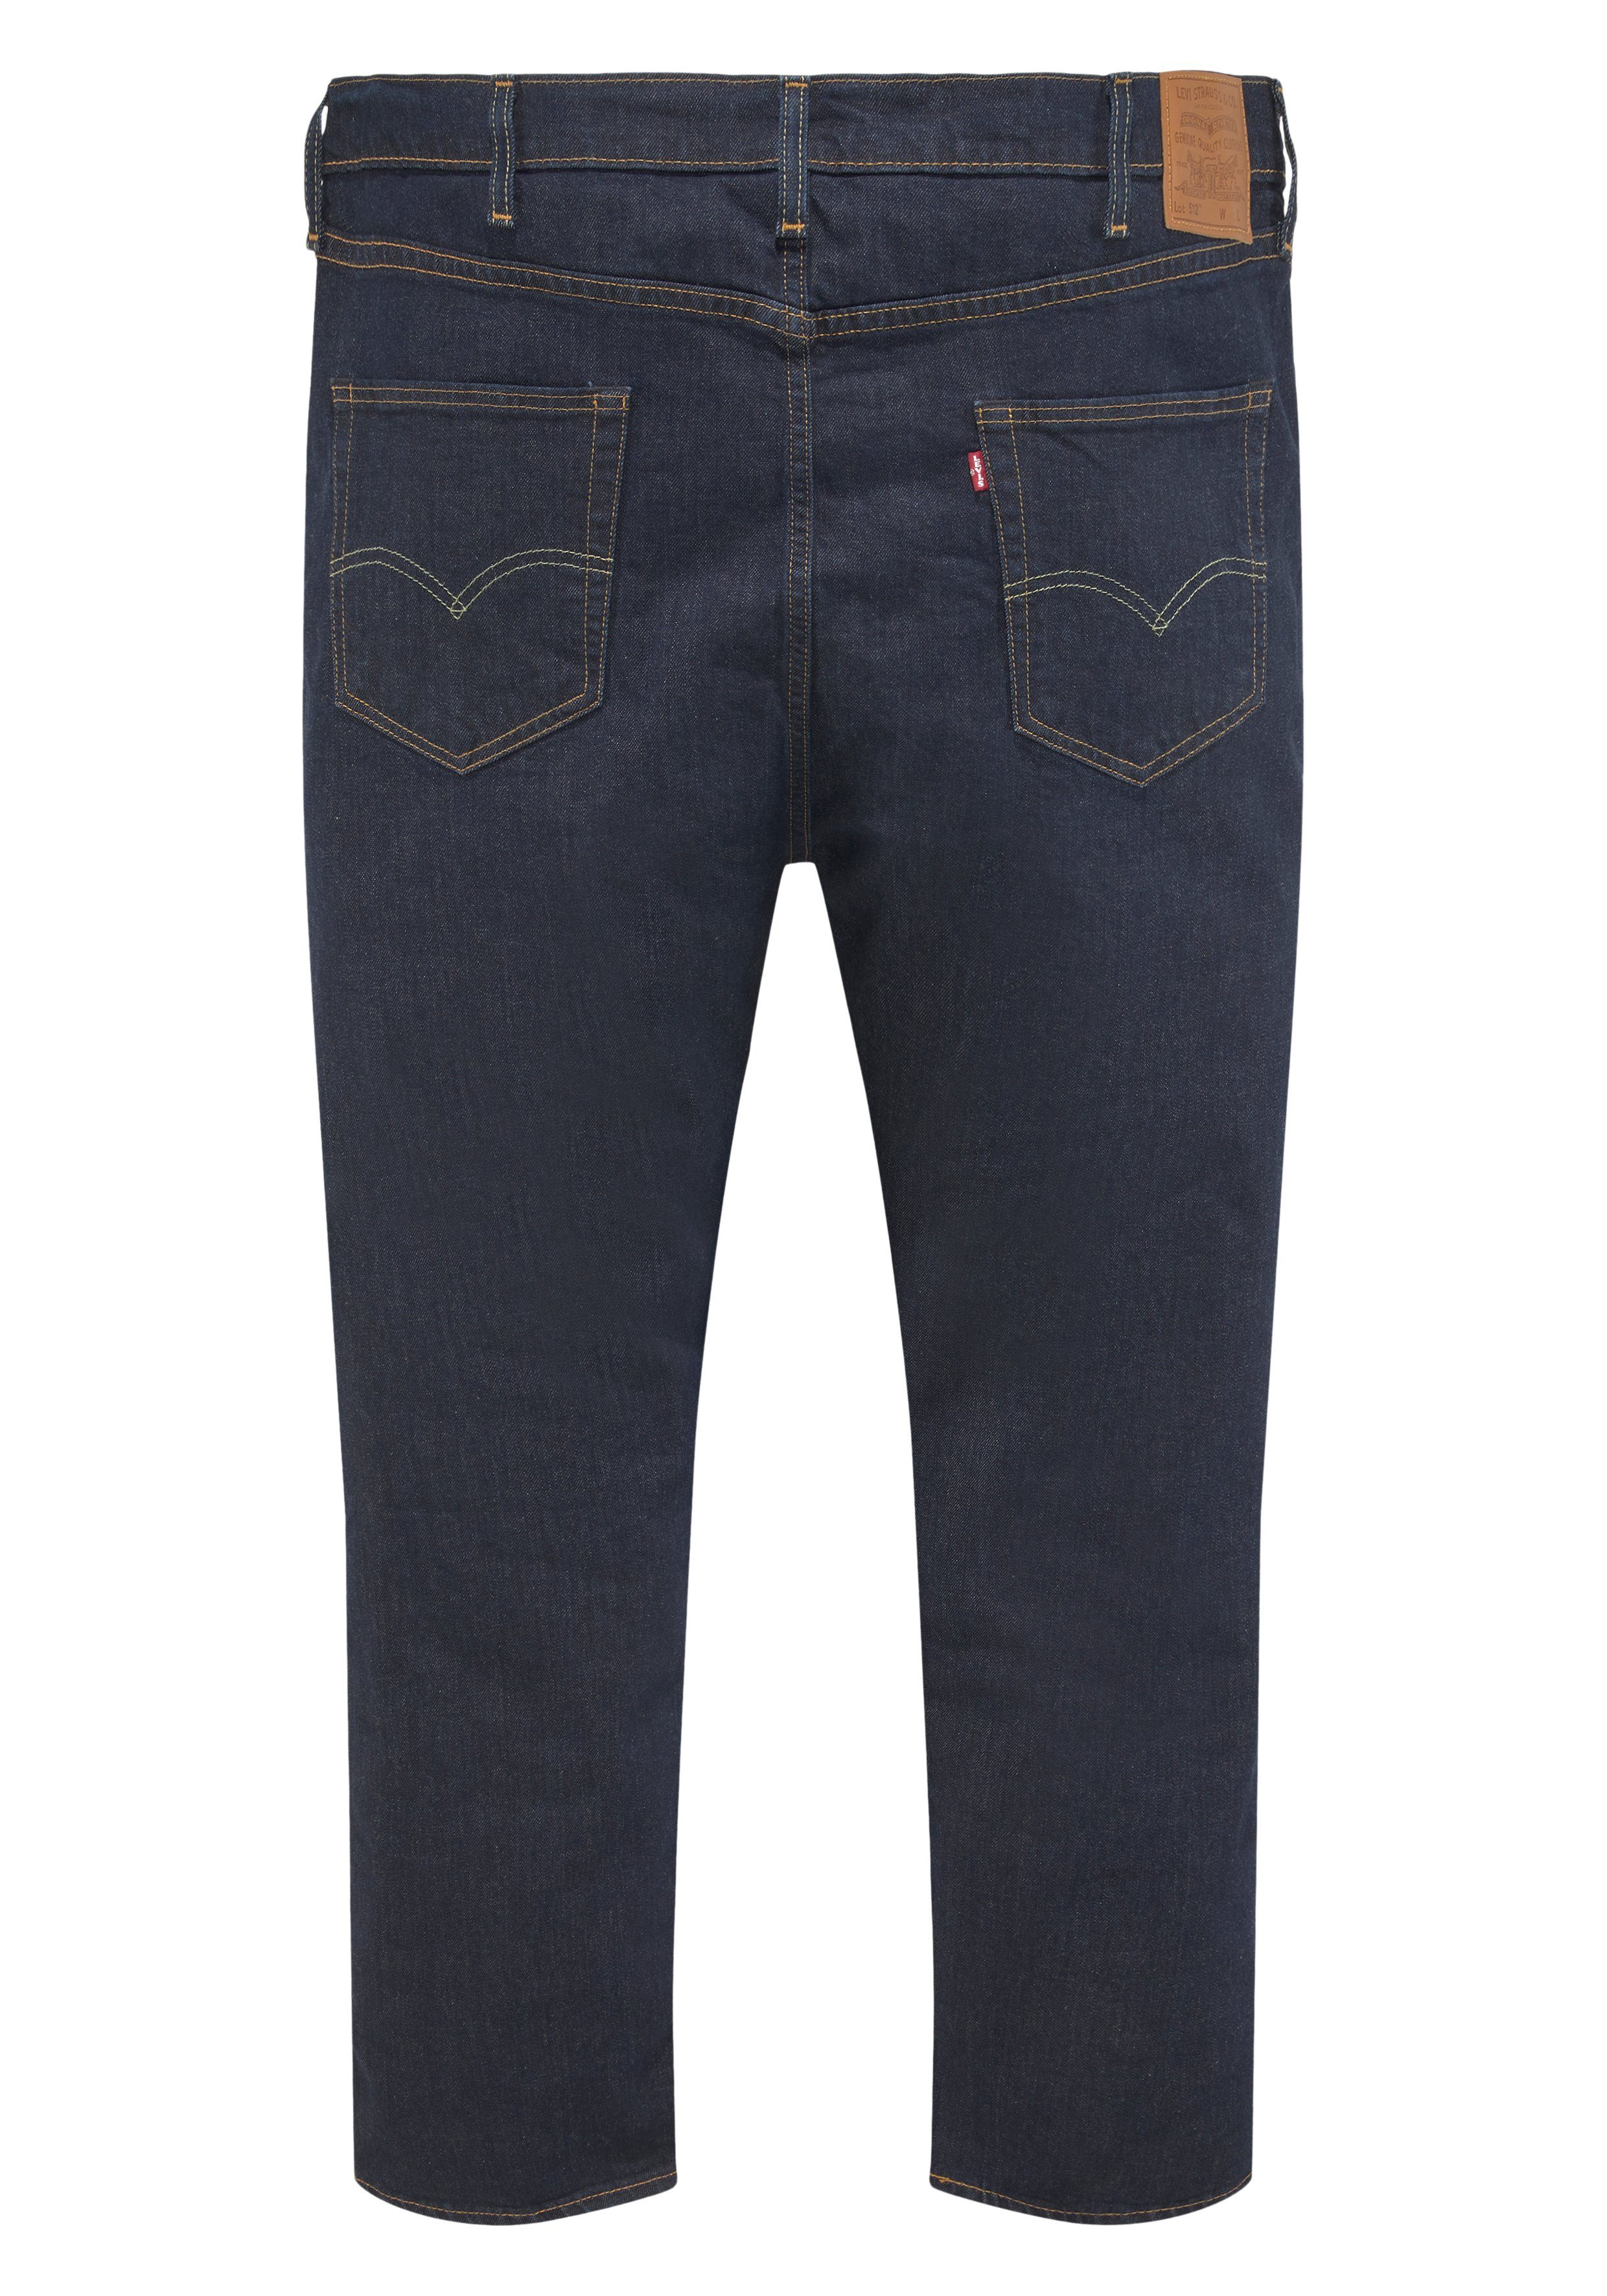 Waschung Levi's® Plus ROCK in Tapered-fit-Jeans authentischer 512 COD